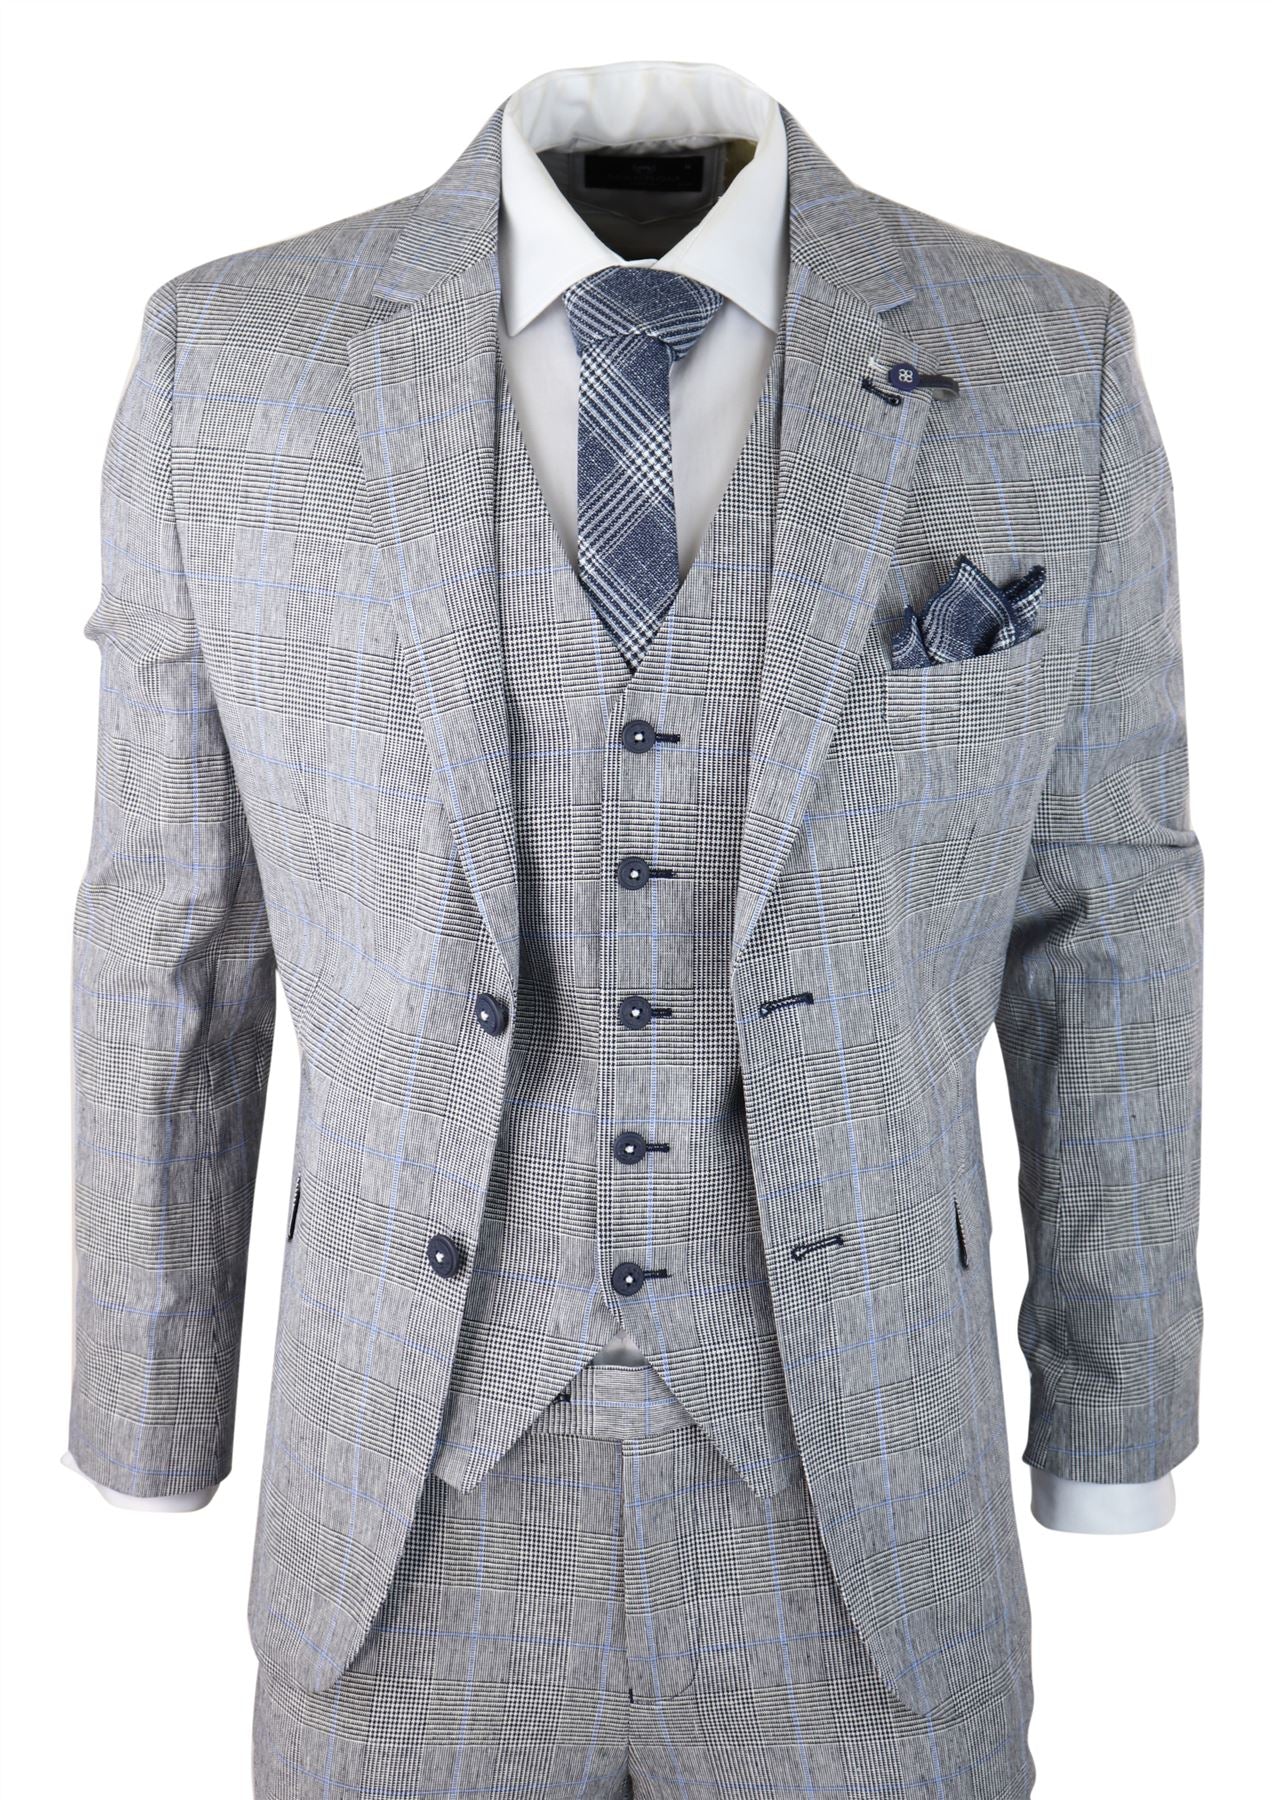 Mens 3 Piece Summer Suit Grey Check Blue Black Tailored Fit Classic ...